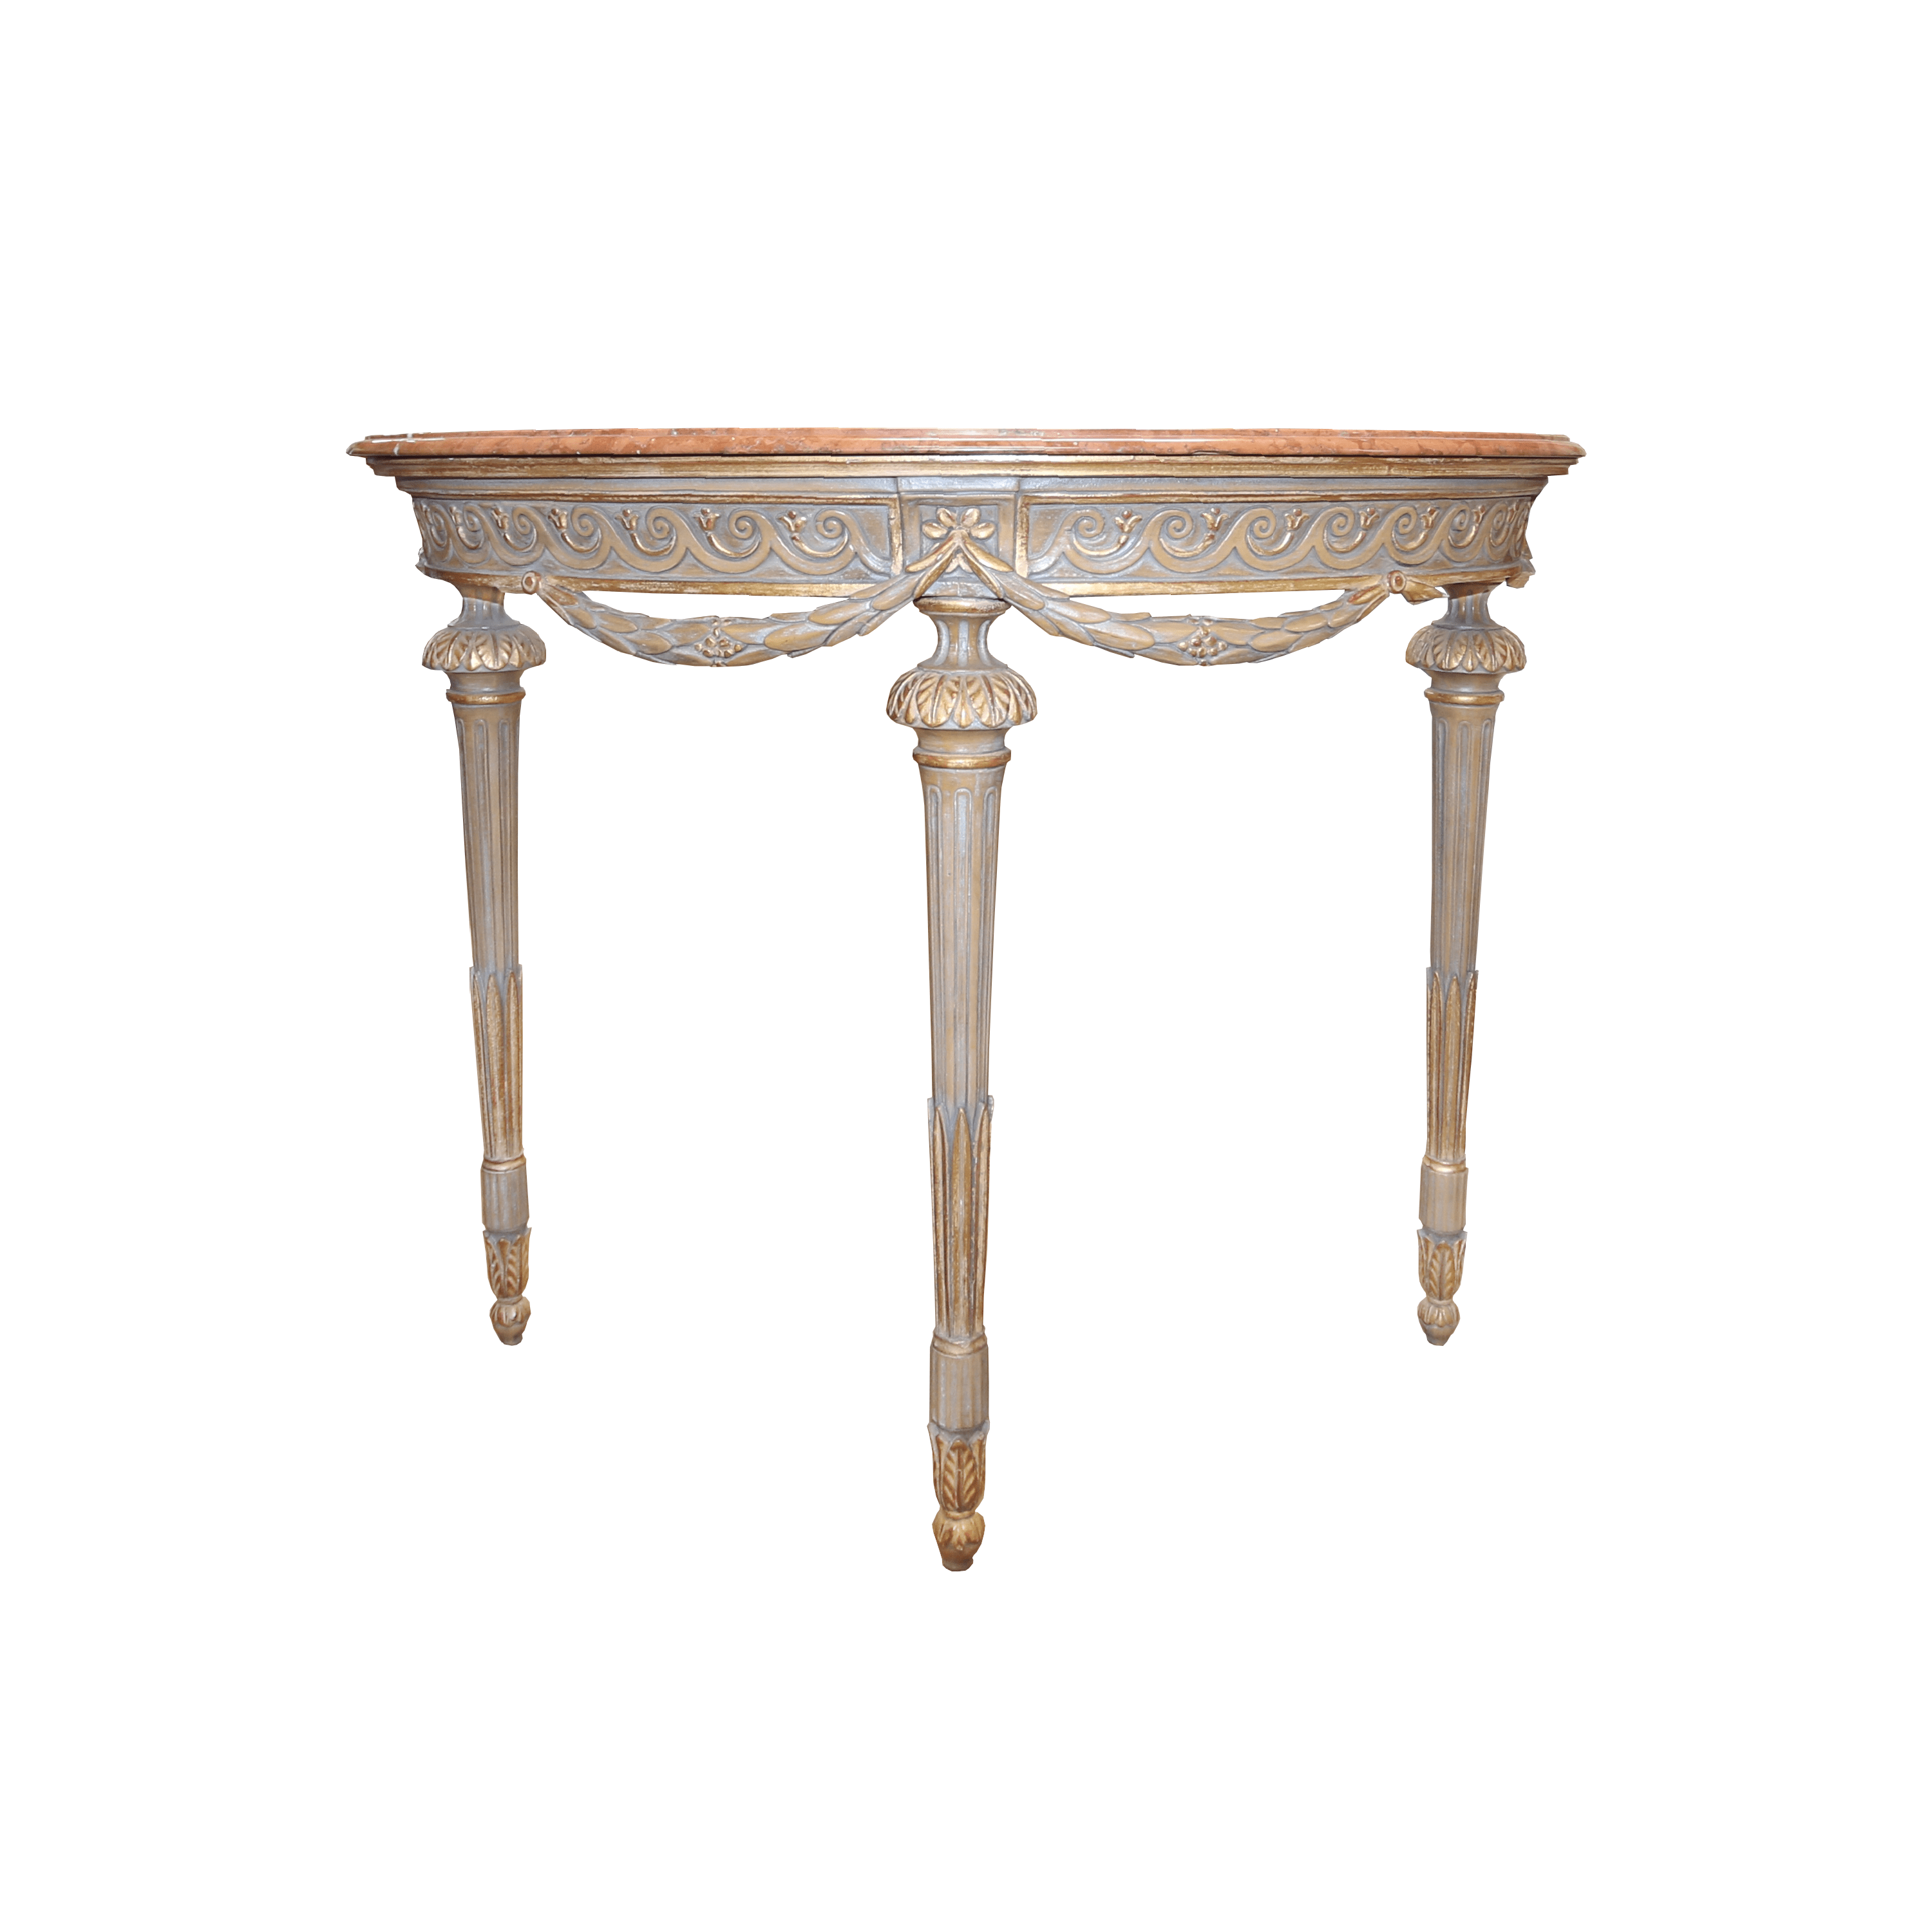 Giltwood and marble console table